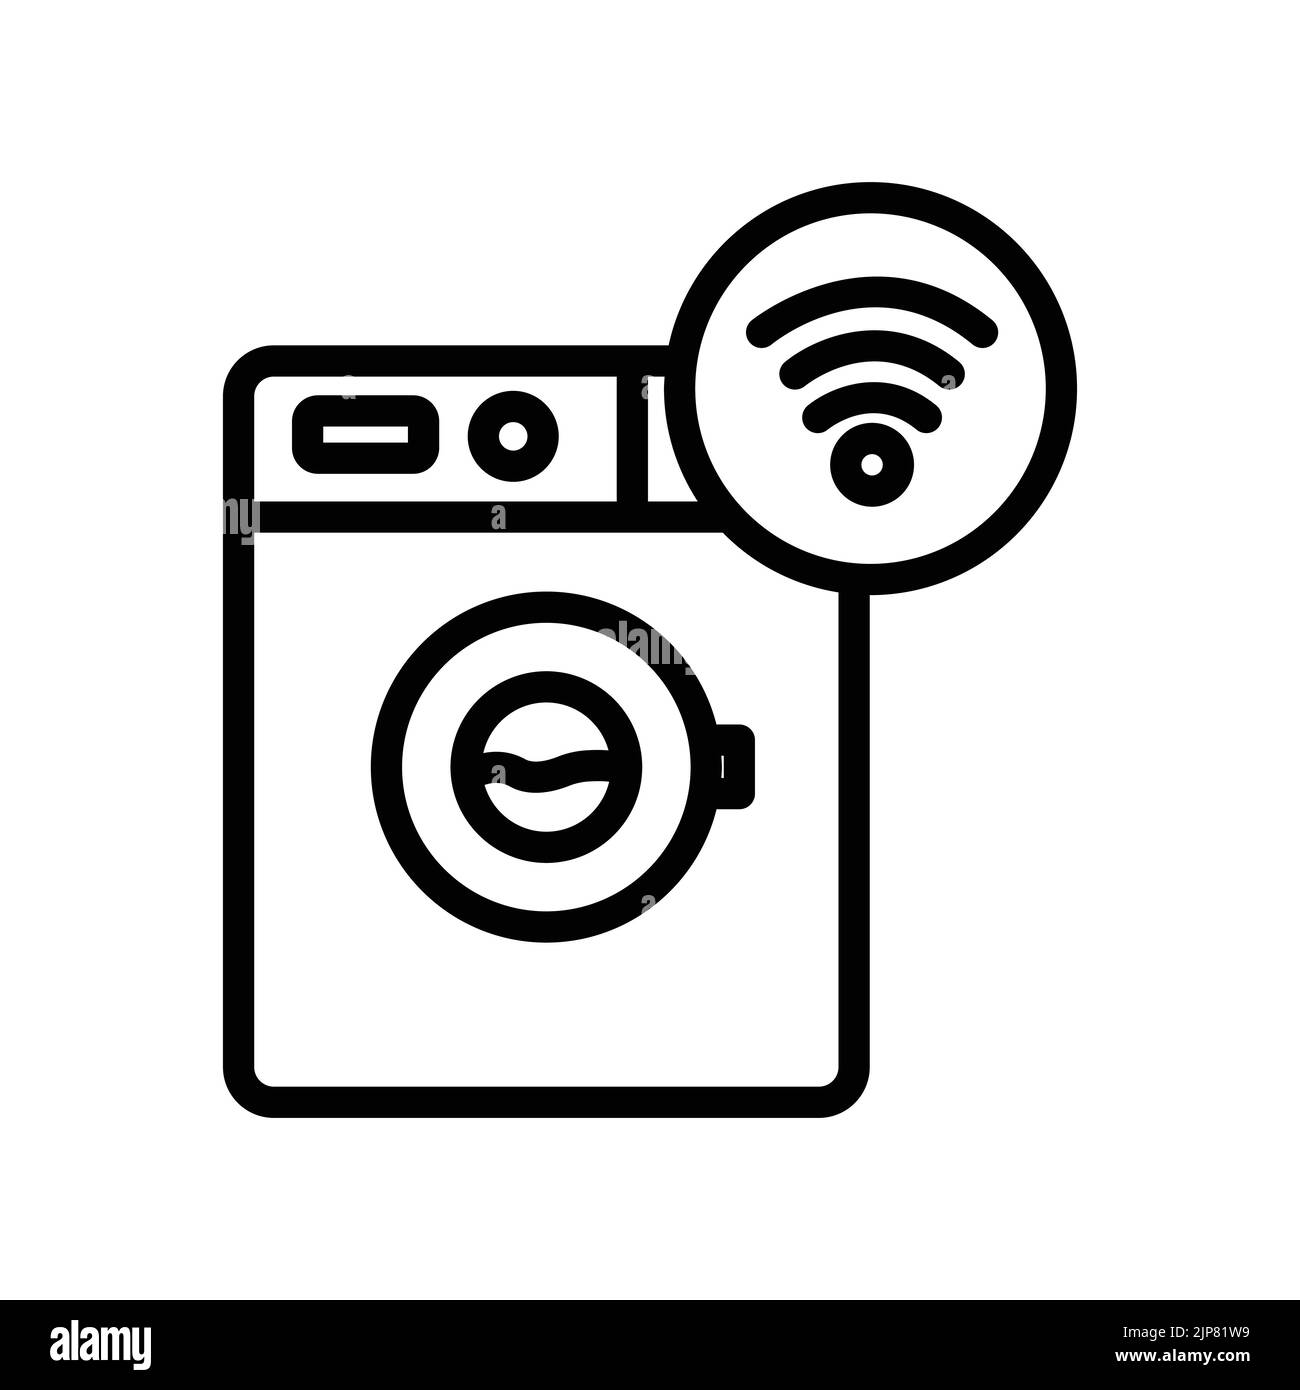 washing machine icon with signal. icon related to technology. smart device. line icon style. Simple design editable Stock Vector